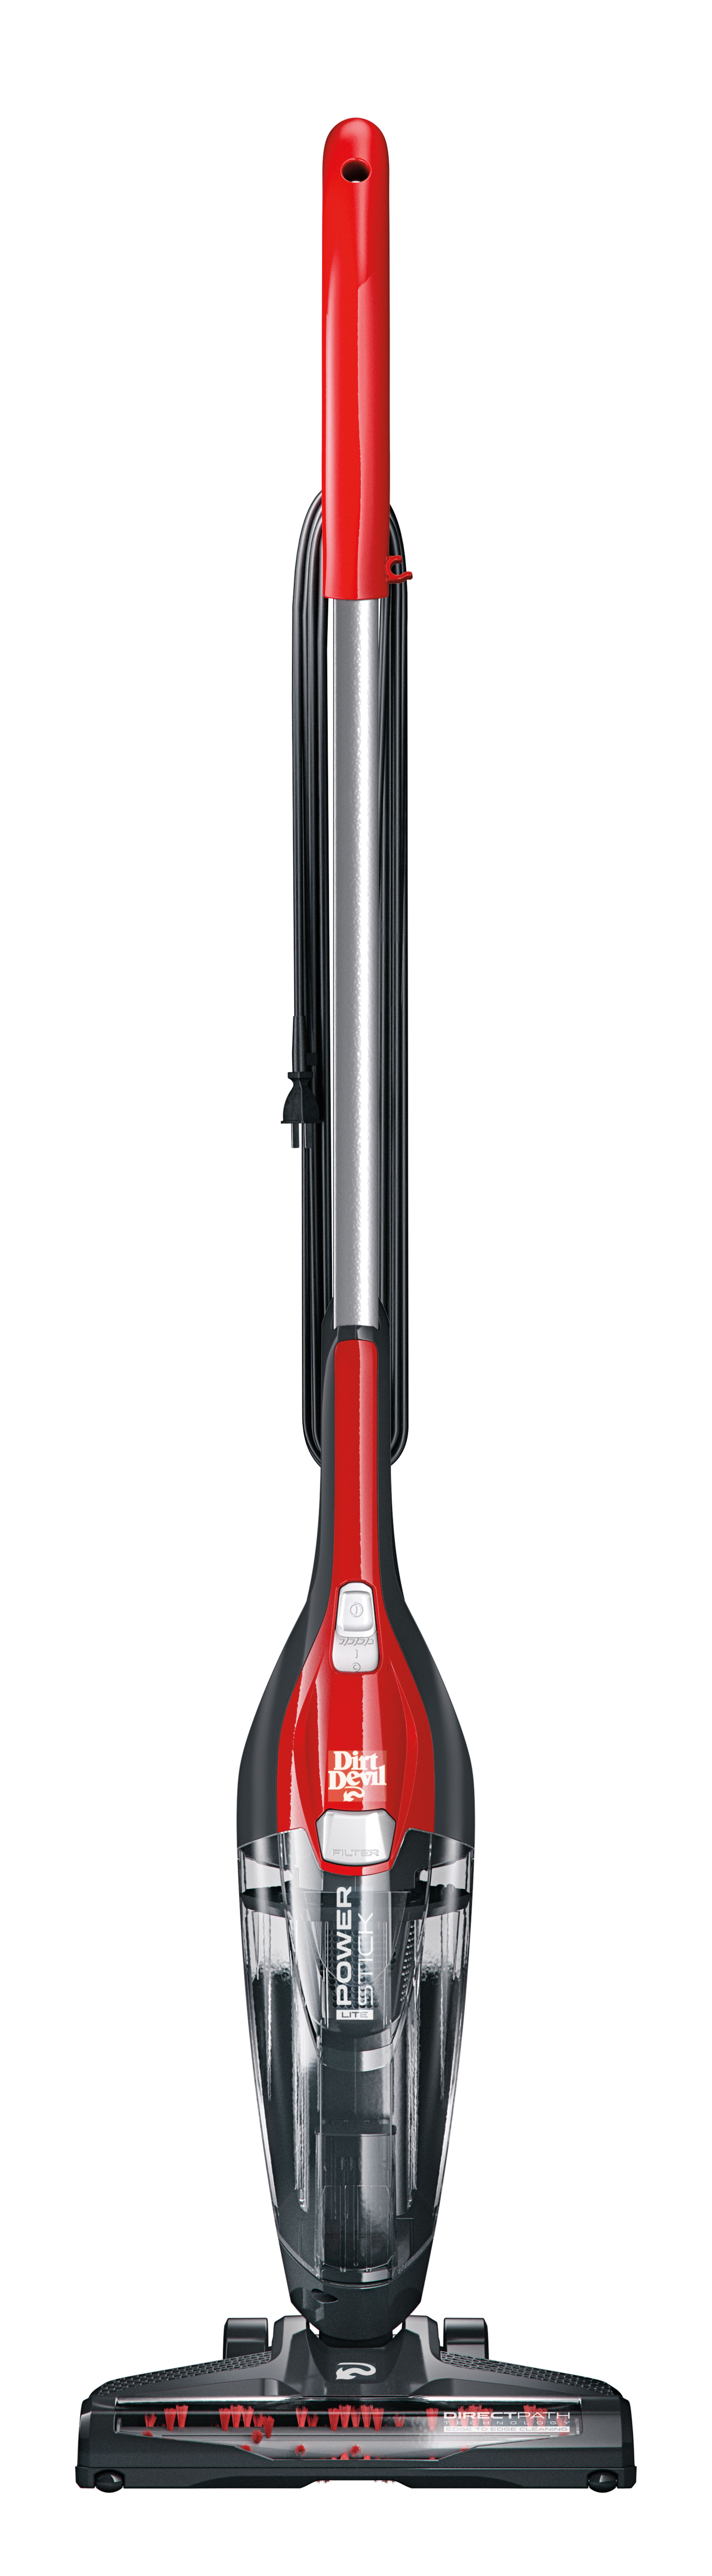 Dirt Devil Power Stick Lite 4-in-1 Corded Stick Vacuum Cleaner, SD22030, New - image 1 of 6